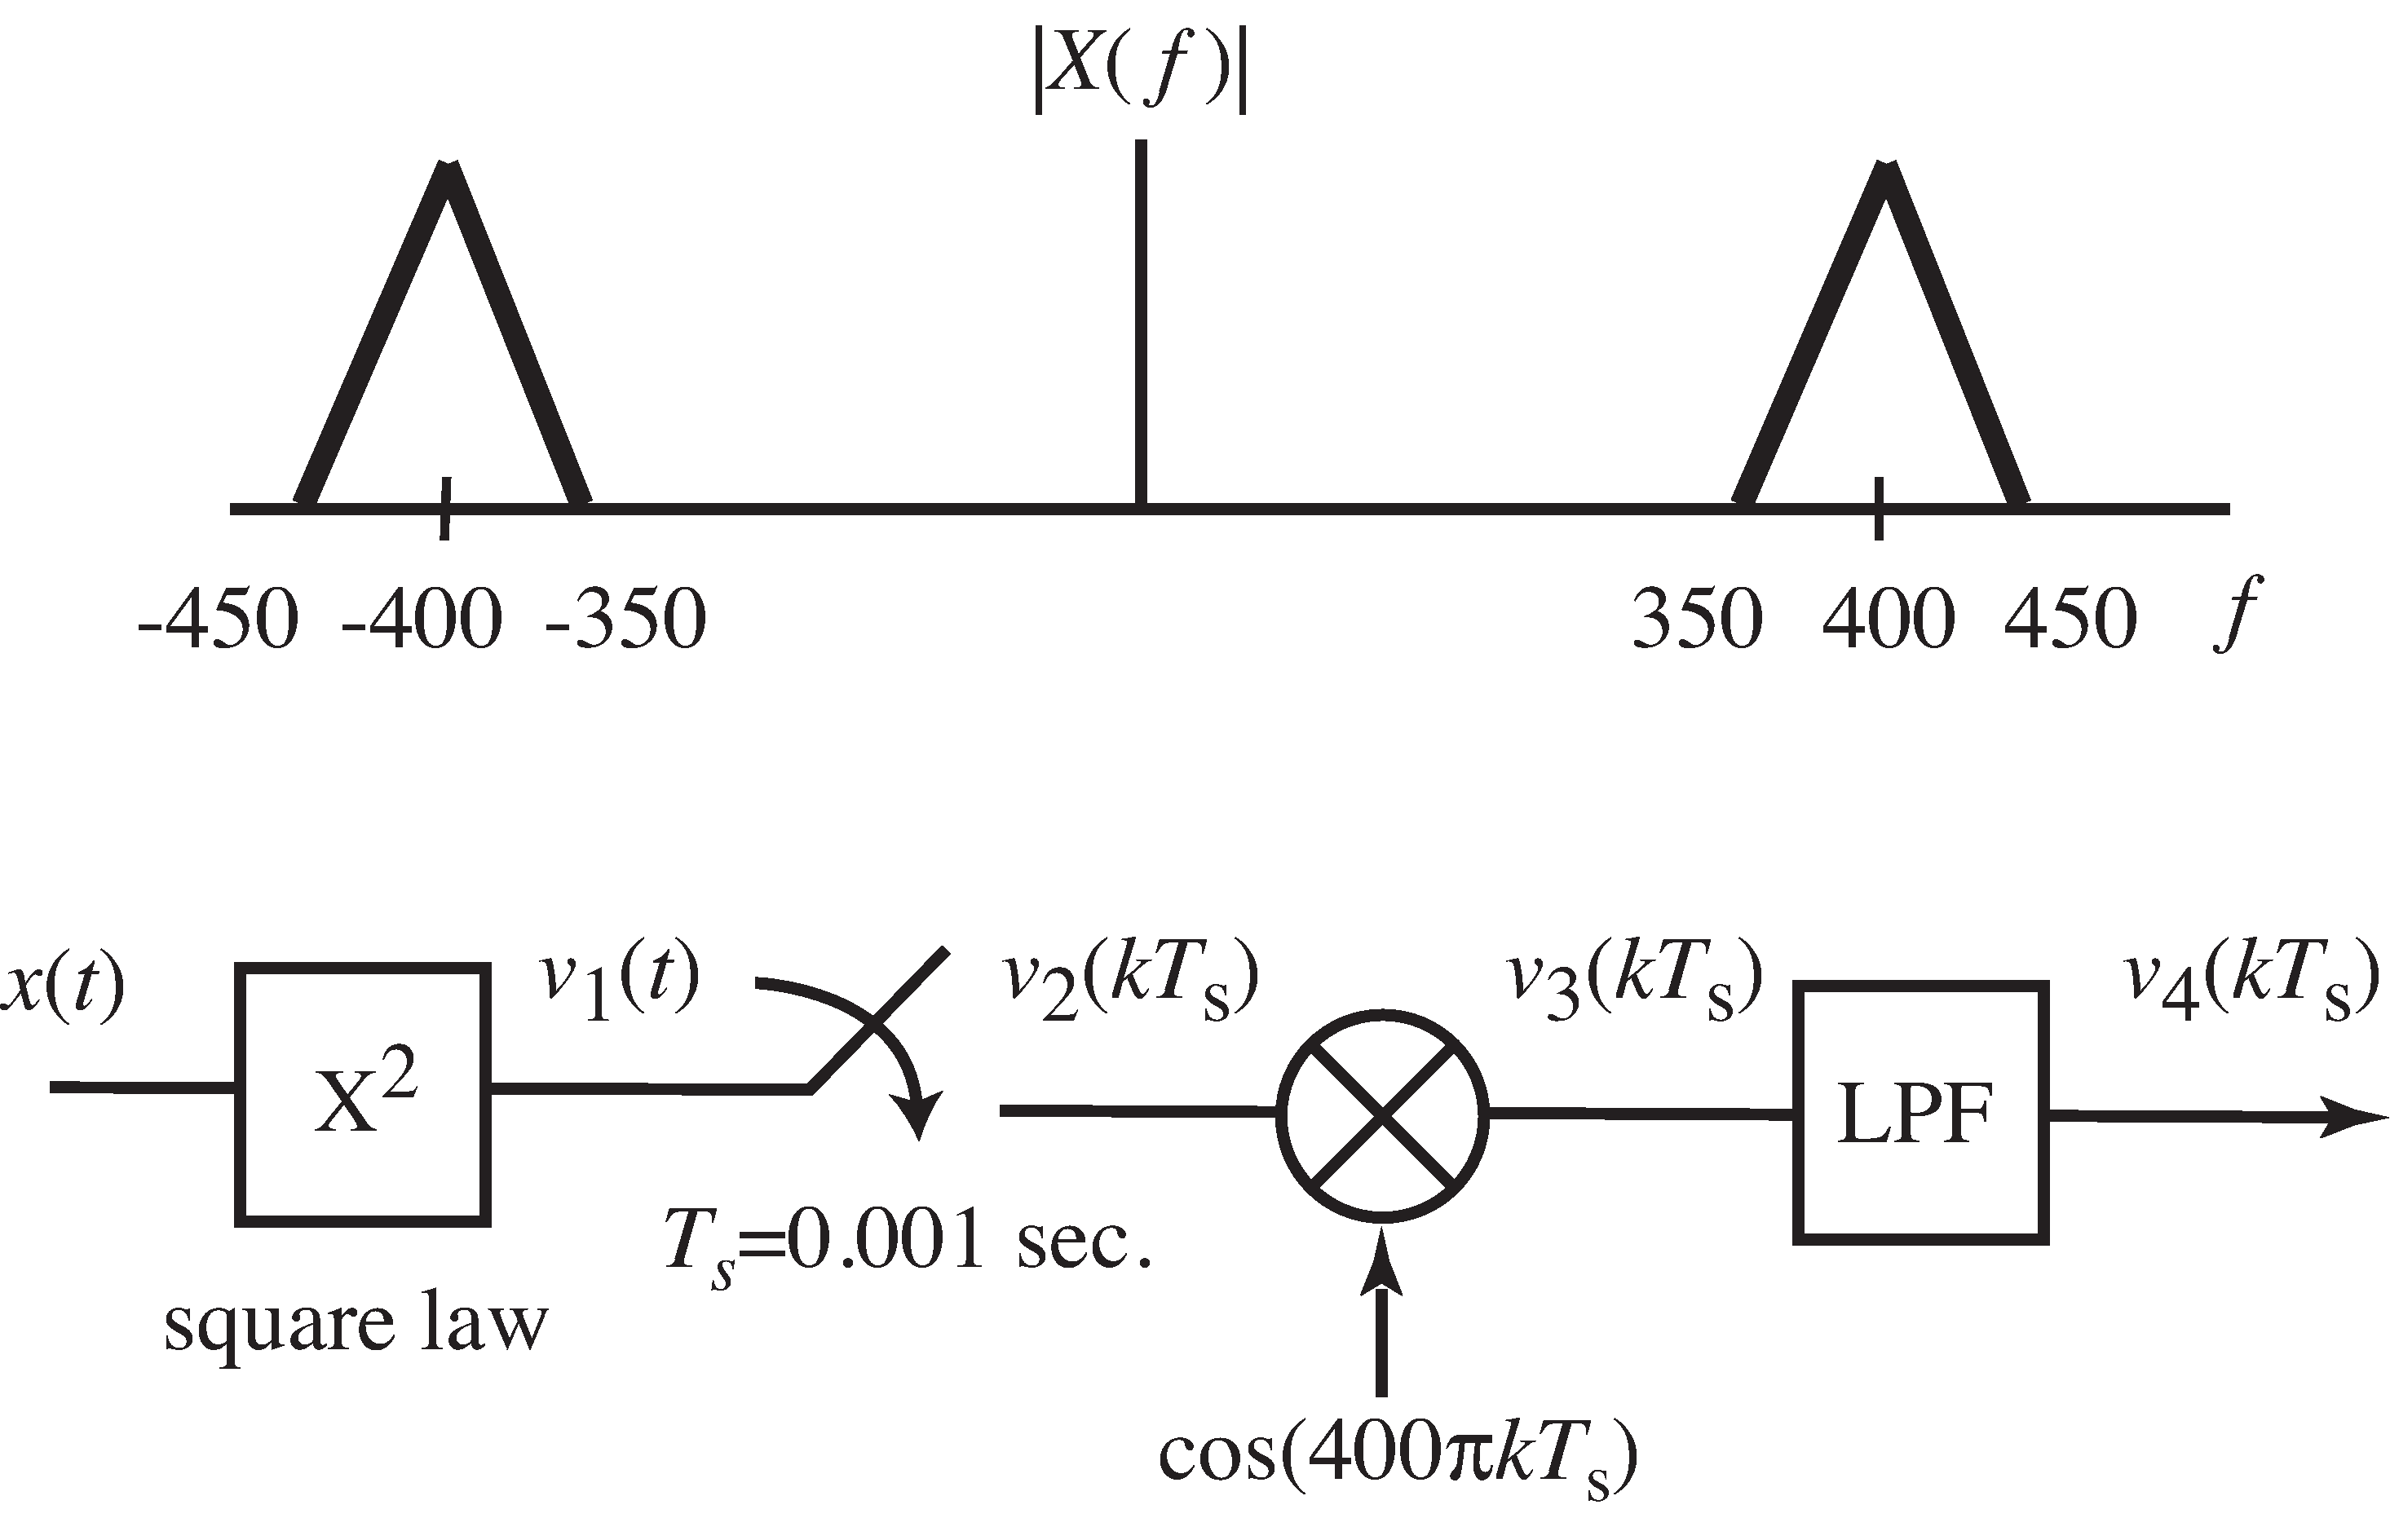 The signal x(t) with spectrum X(f) is input into this communication system. Exercise 6-5 asks for the absolute bandwidth of the signal at each point as it moves through the system.